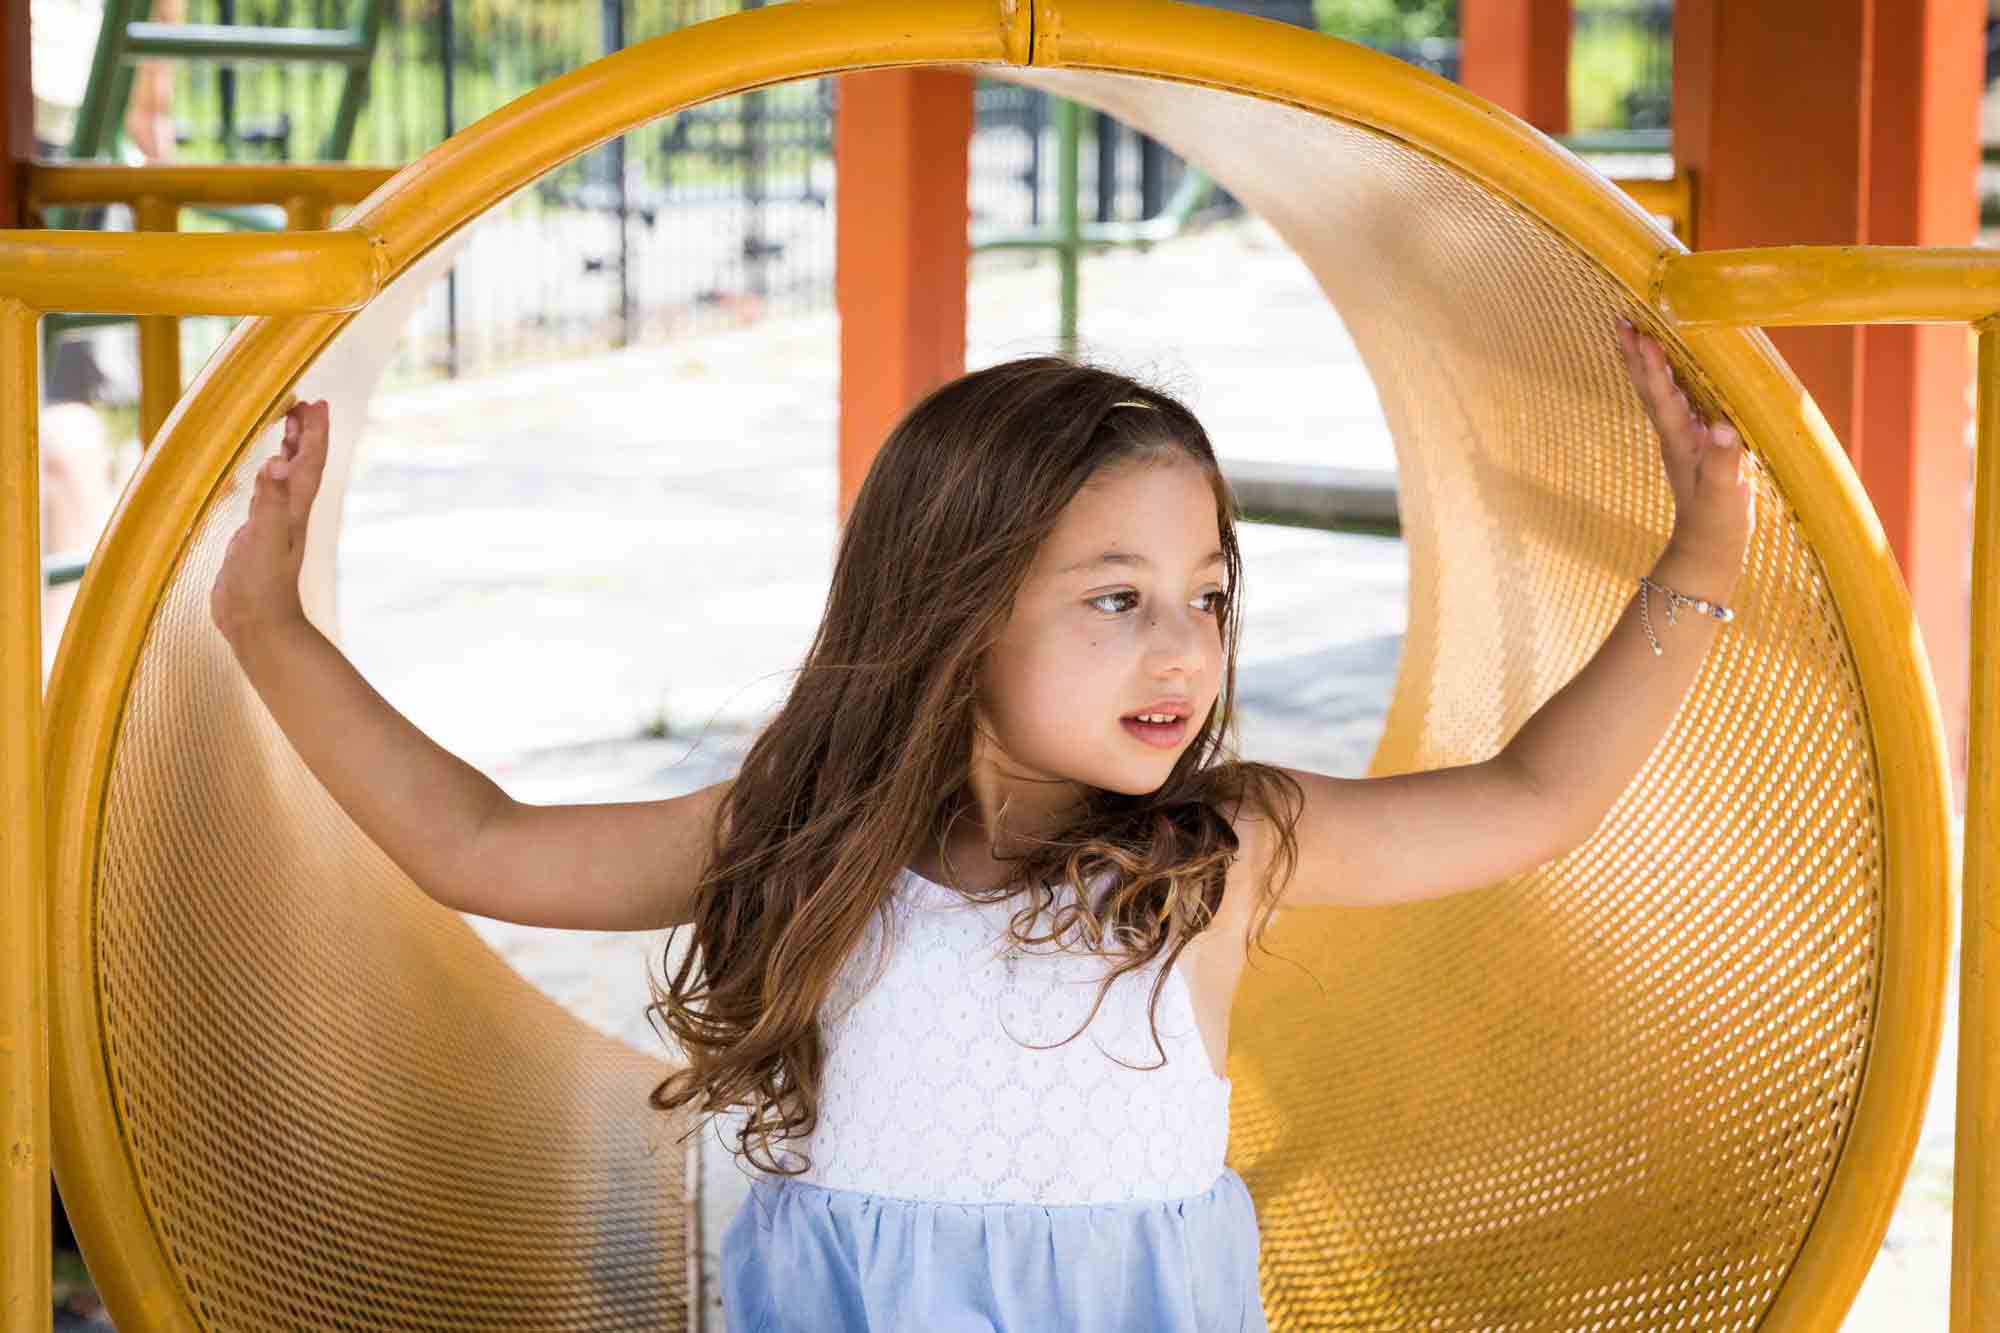 Little girl with arms outstretched on orange tube on playground